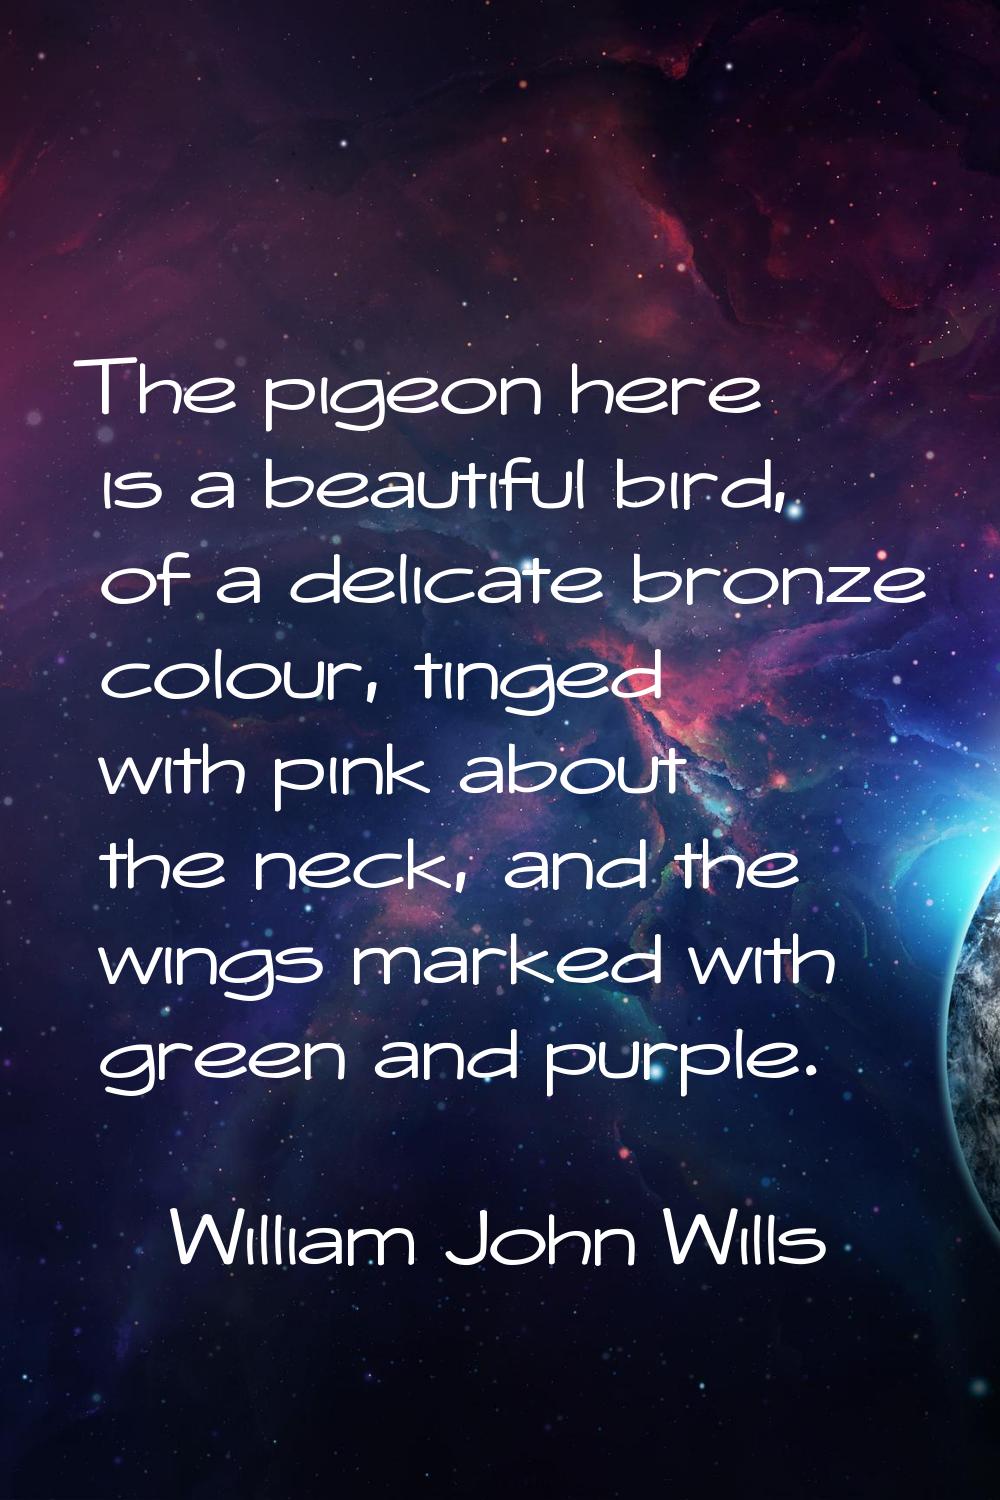 The pigeon here is a beautiful bird, of a delicate bronze colour, tinged with pink about the neck, 